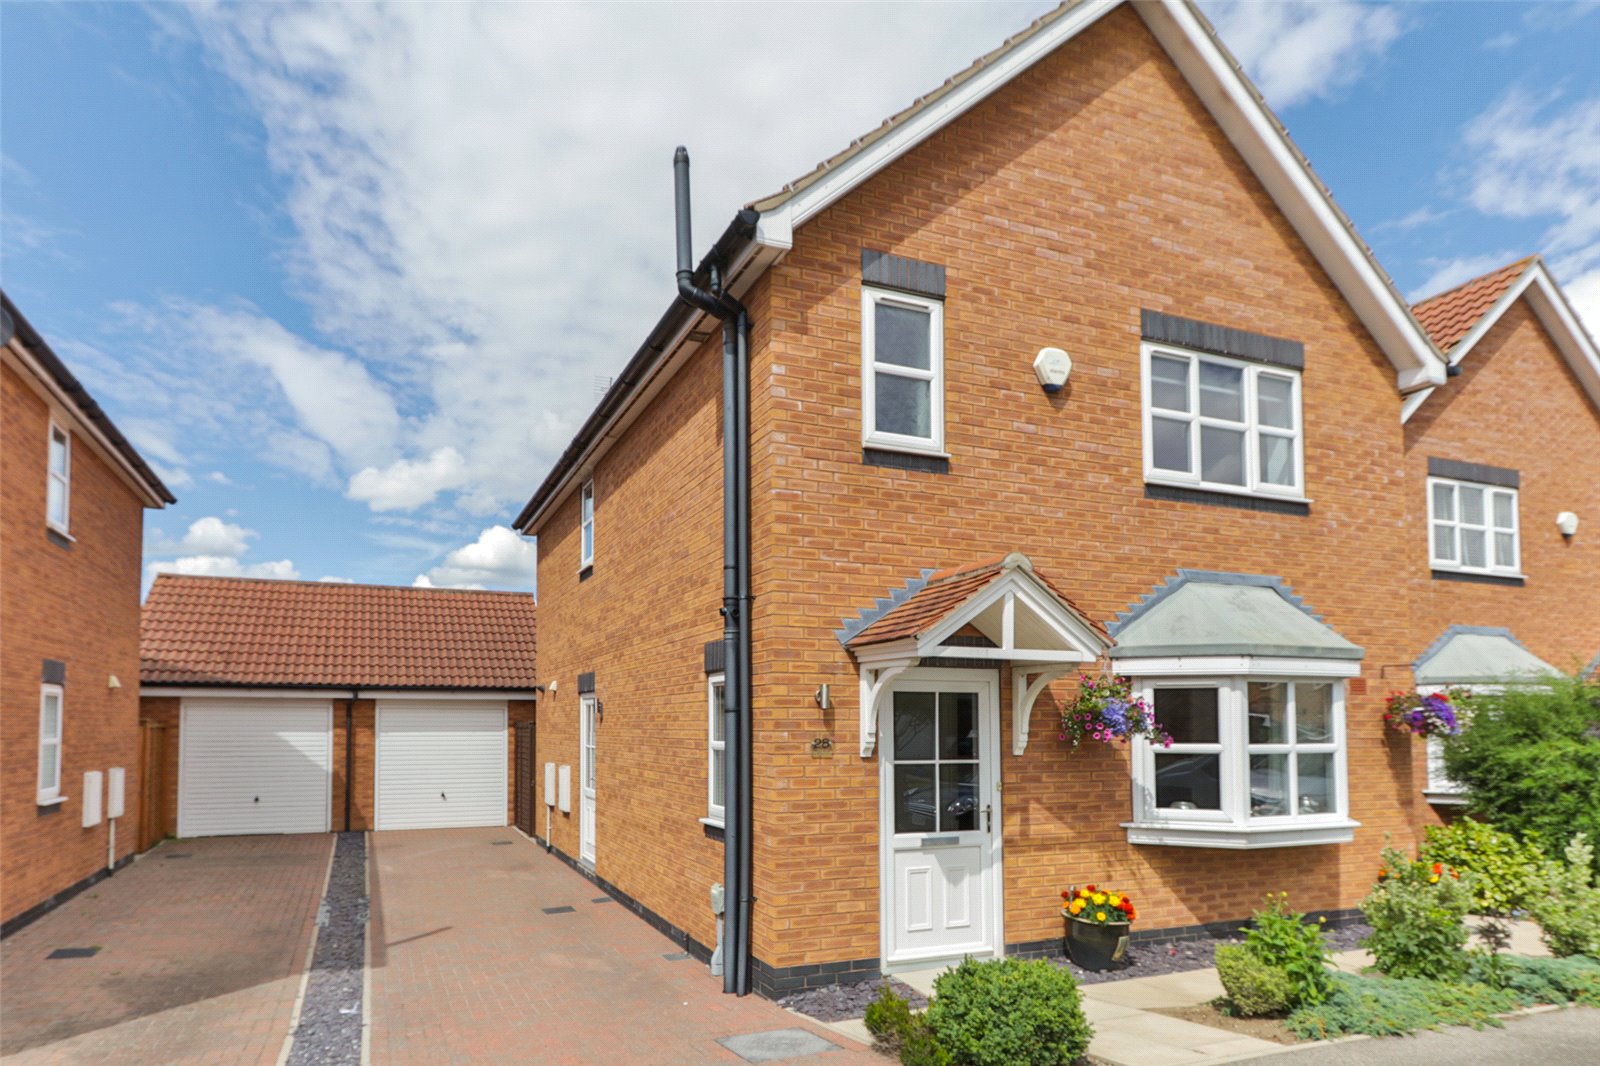 3 bed house for sale in Astley Close, Hedon, HU12